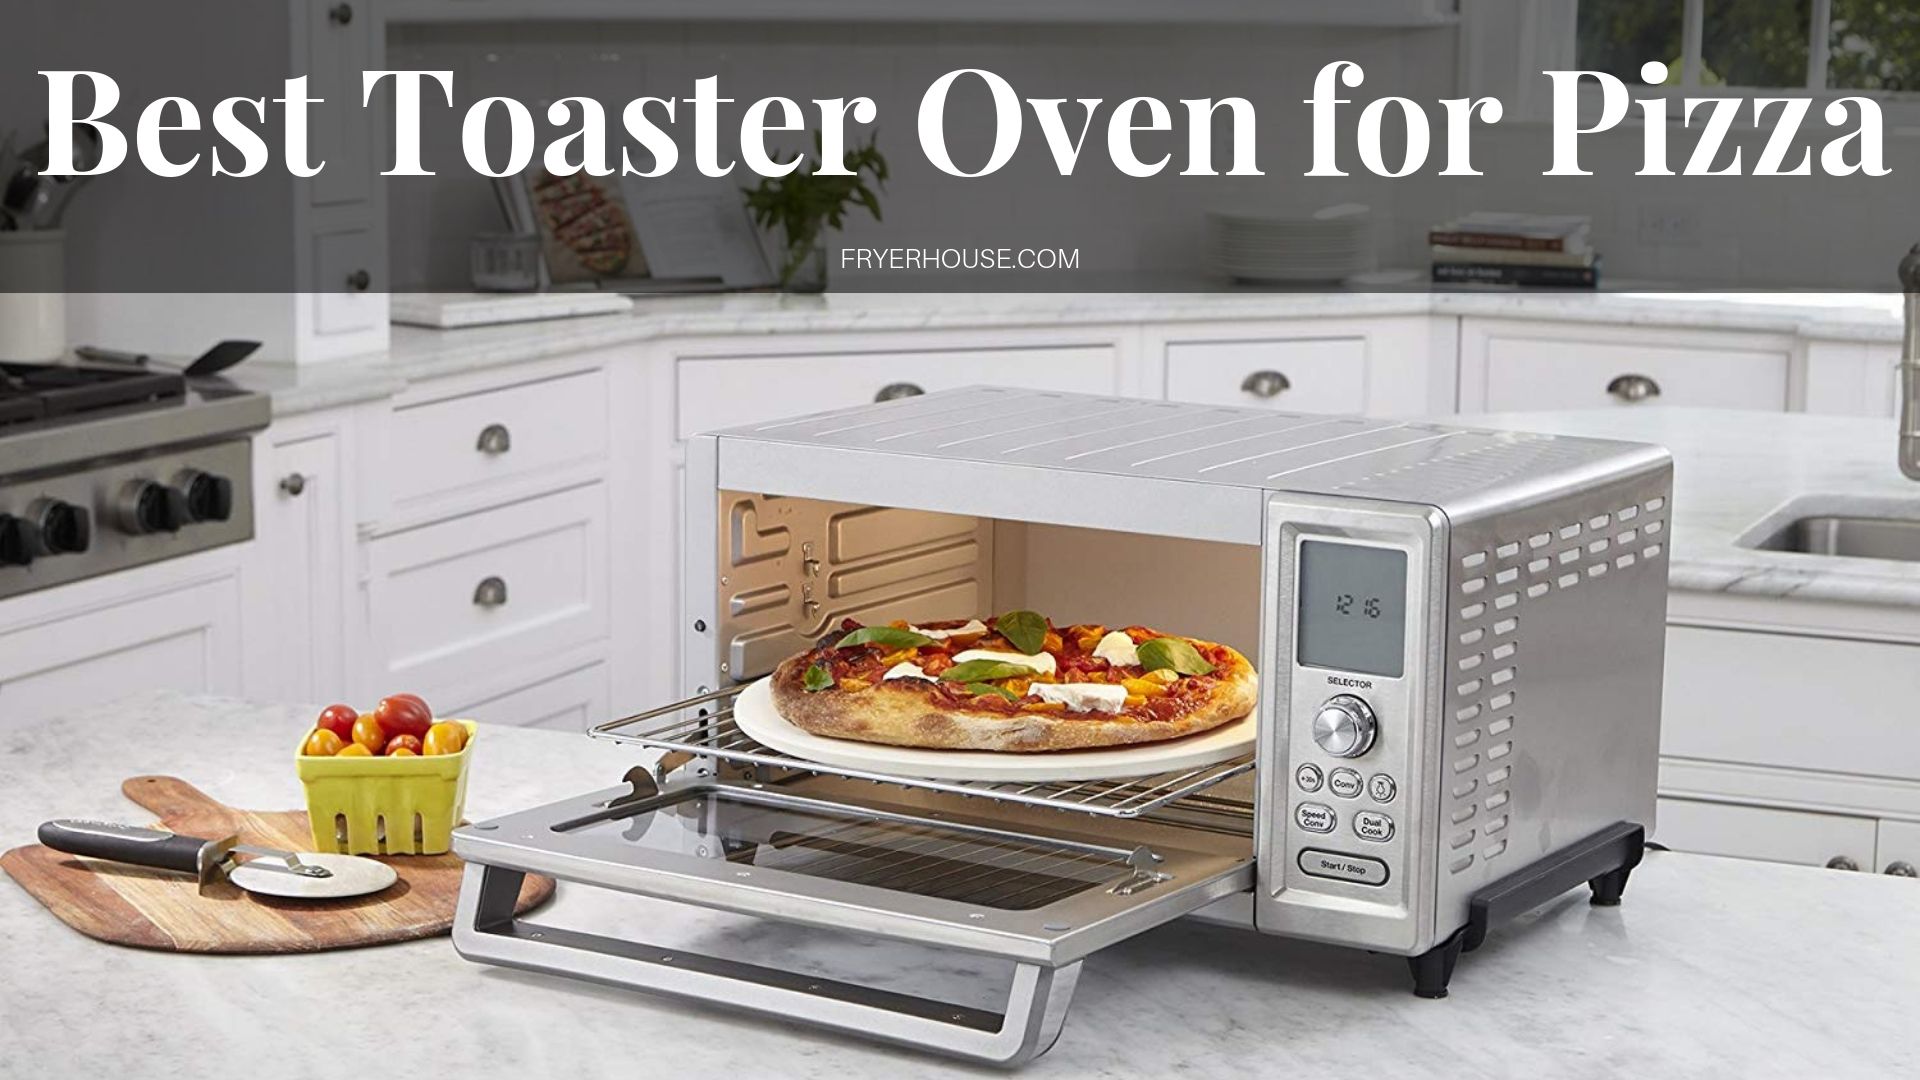 Best Toaster Oven for Pizza